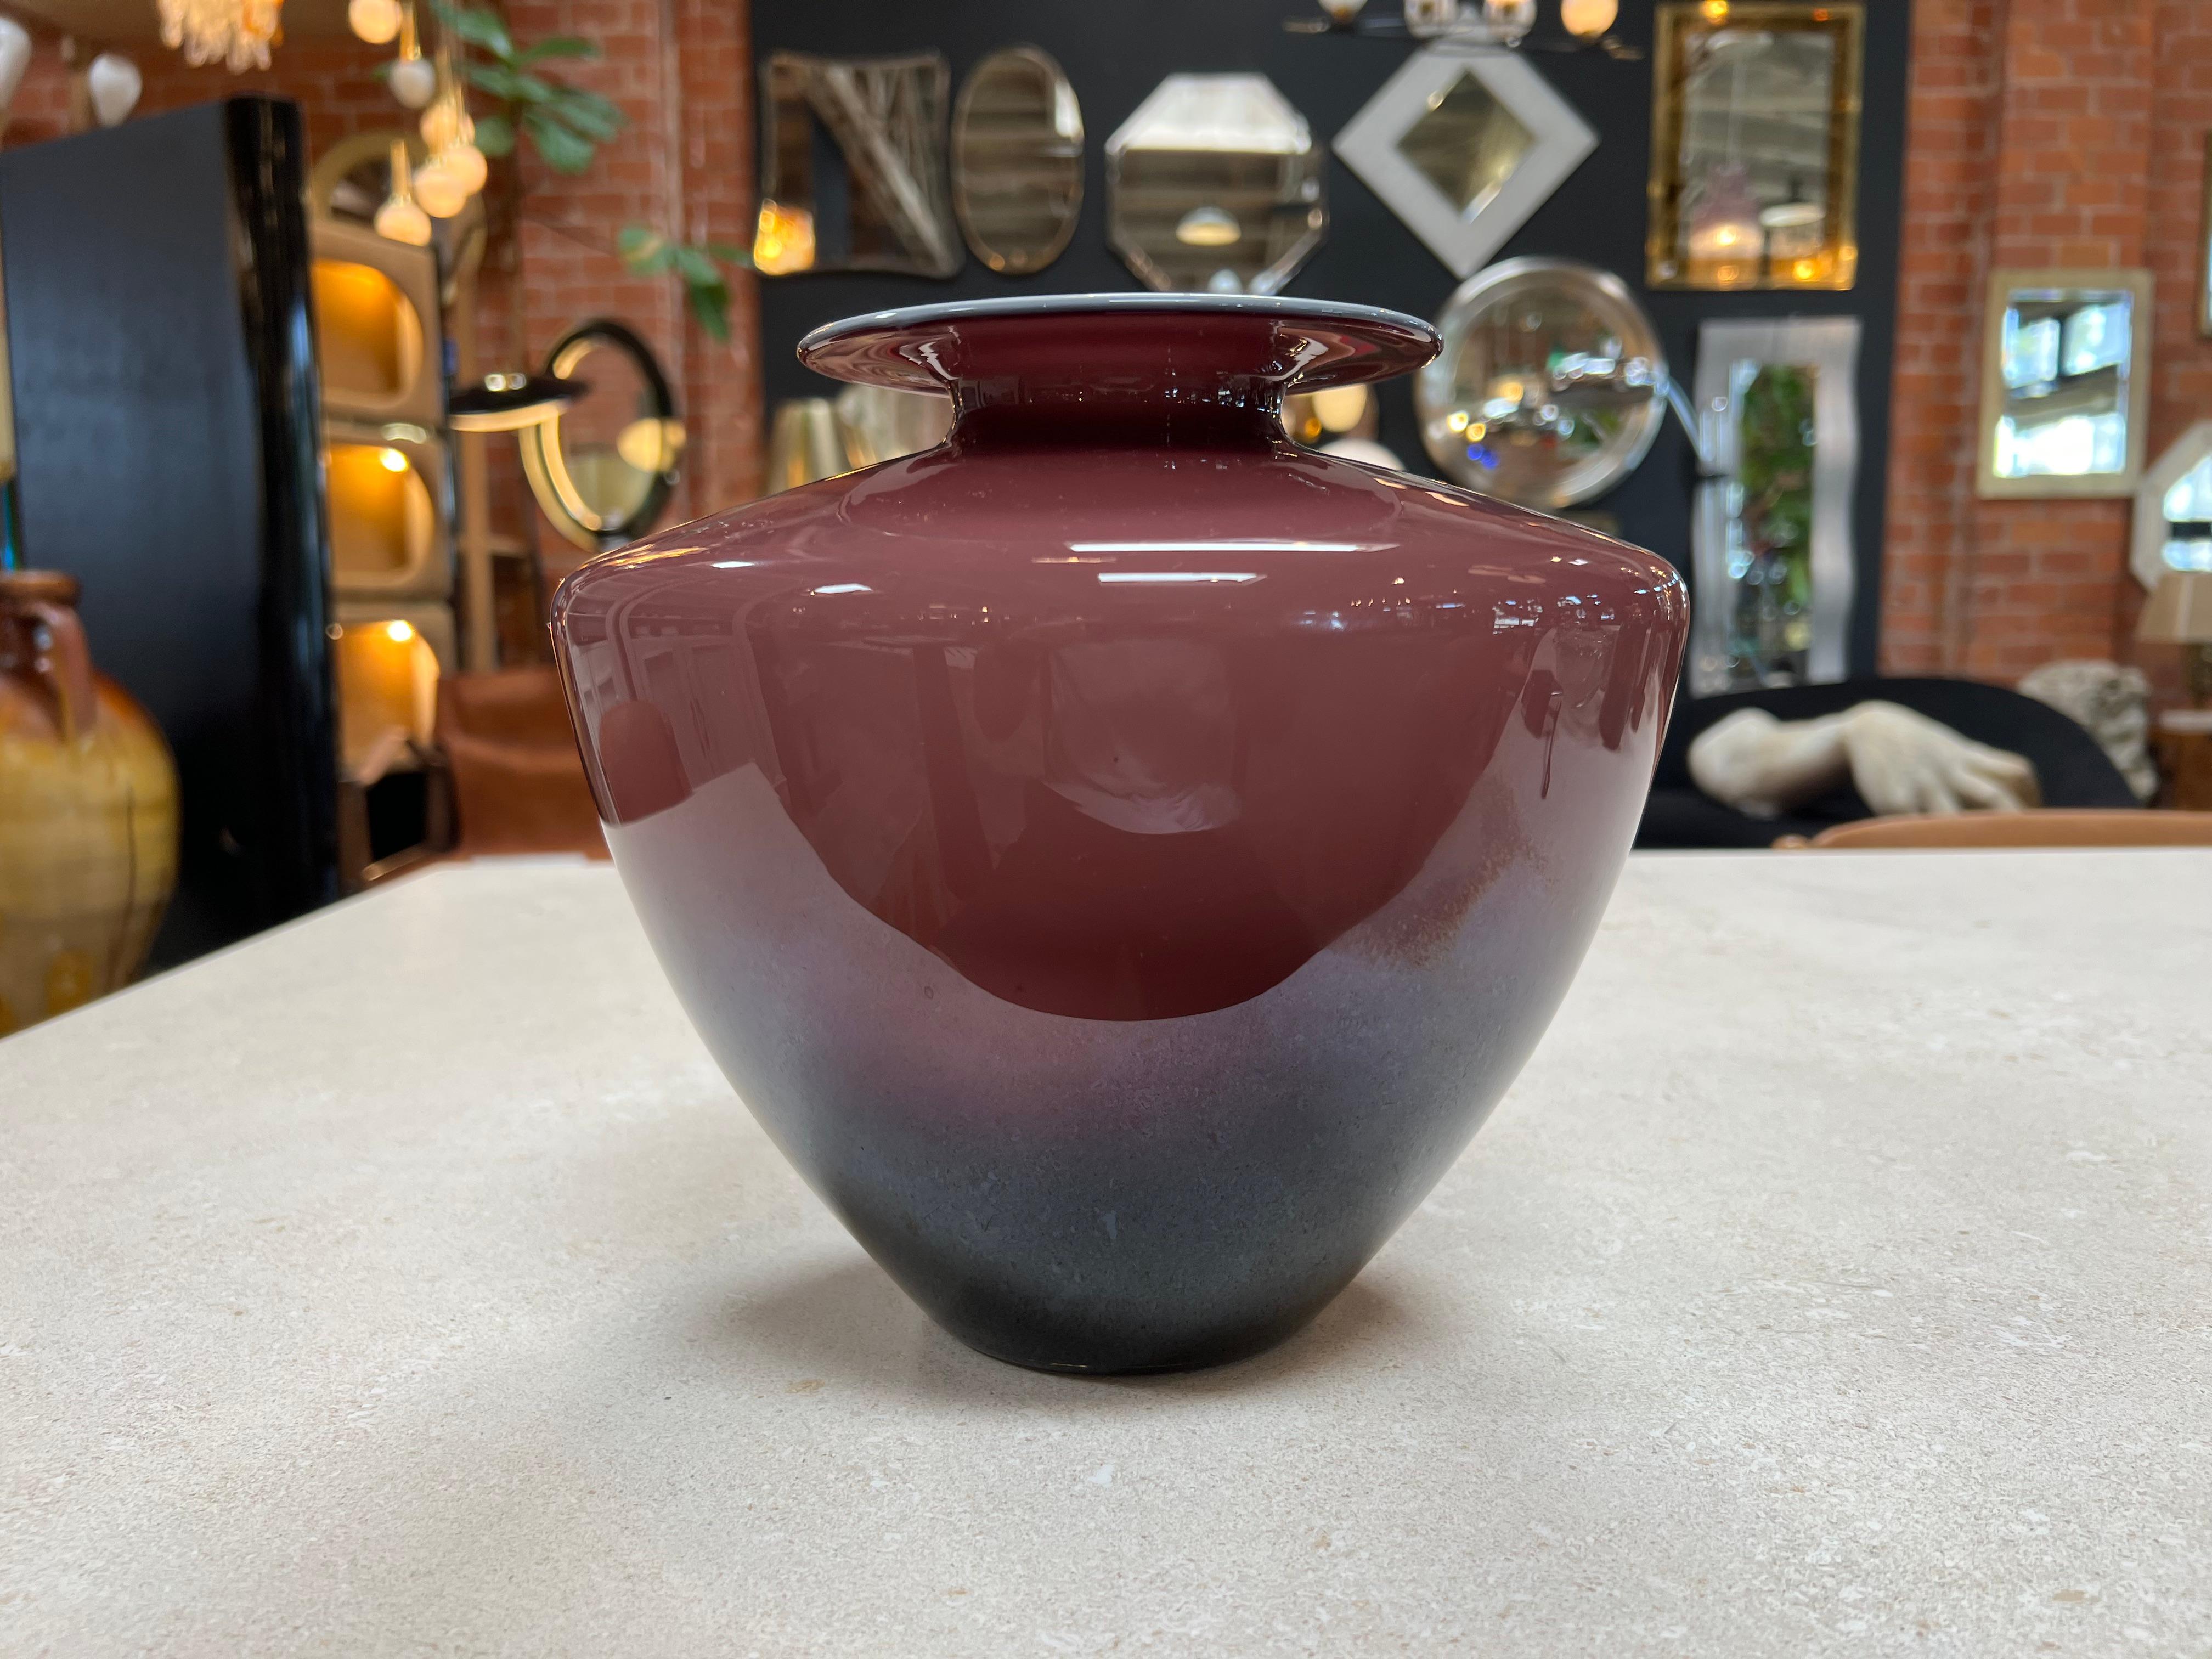 This small decorative purple vase made in Murano in 1980 is an exquisite piece of art crafted with precision and elegance. Its vibrant purple hue adds a touch of sophistication, while the intricate details and craftsmanship characteristic of Murano